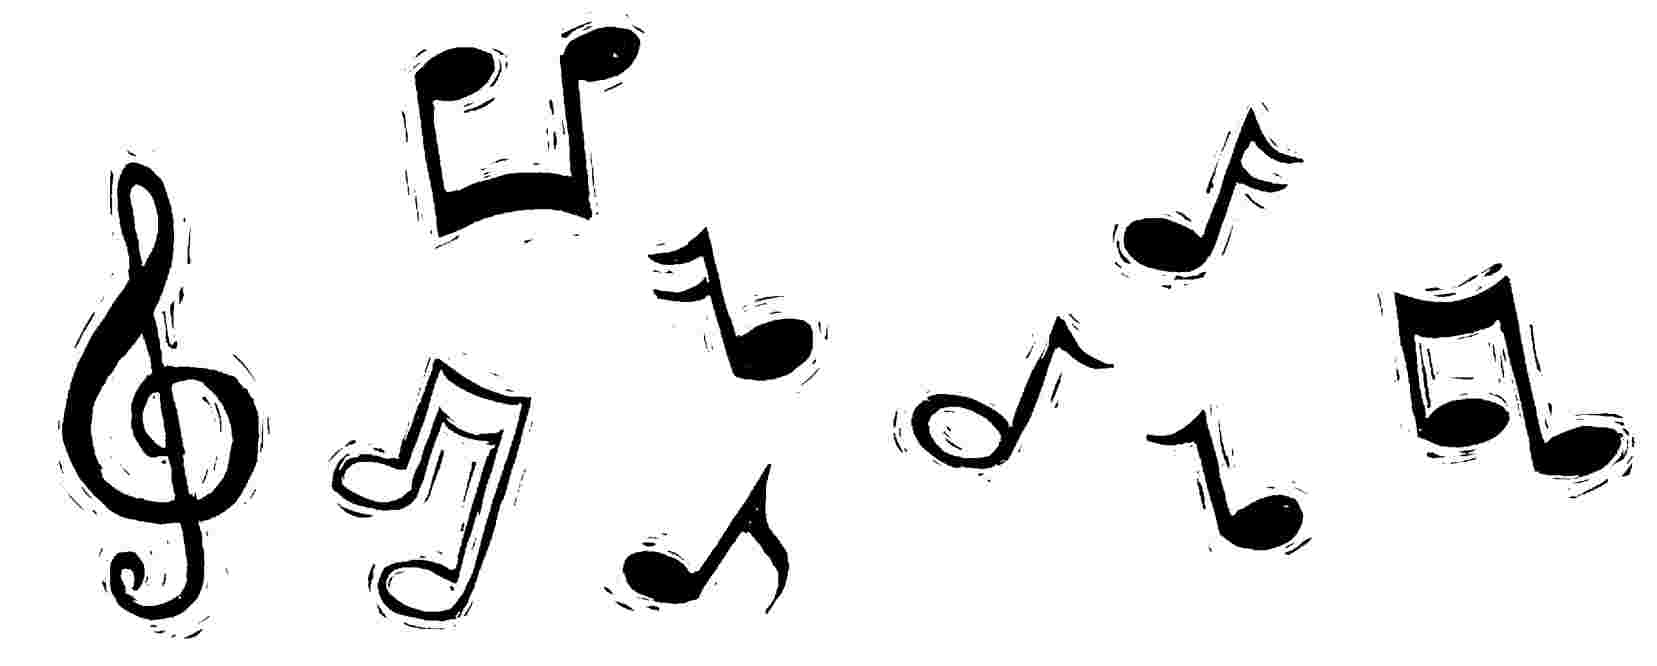 Free Picture Of Music Notes And Symbols, Download Free Clip Art